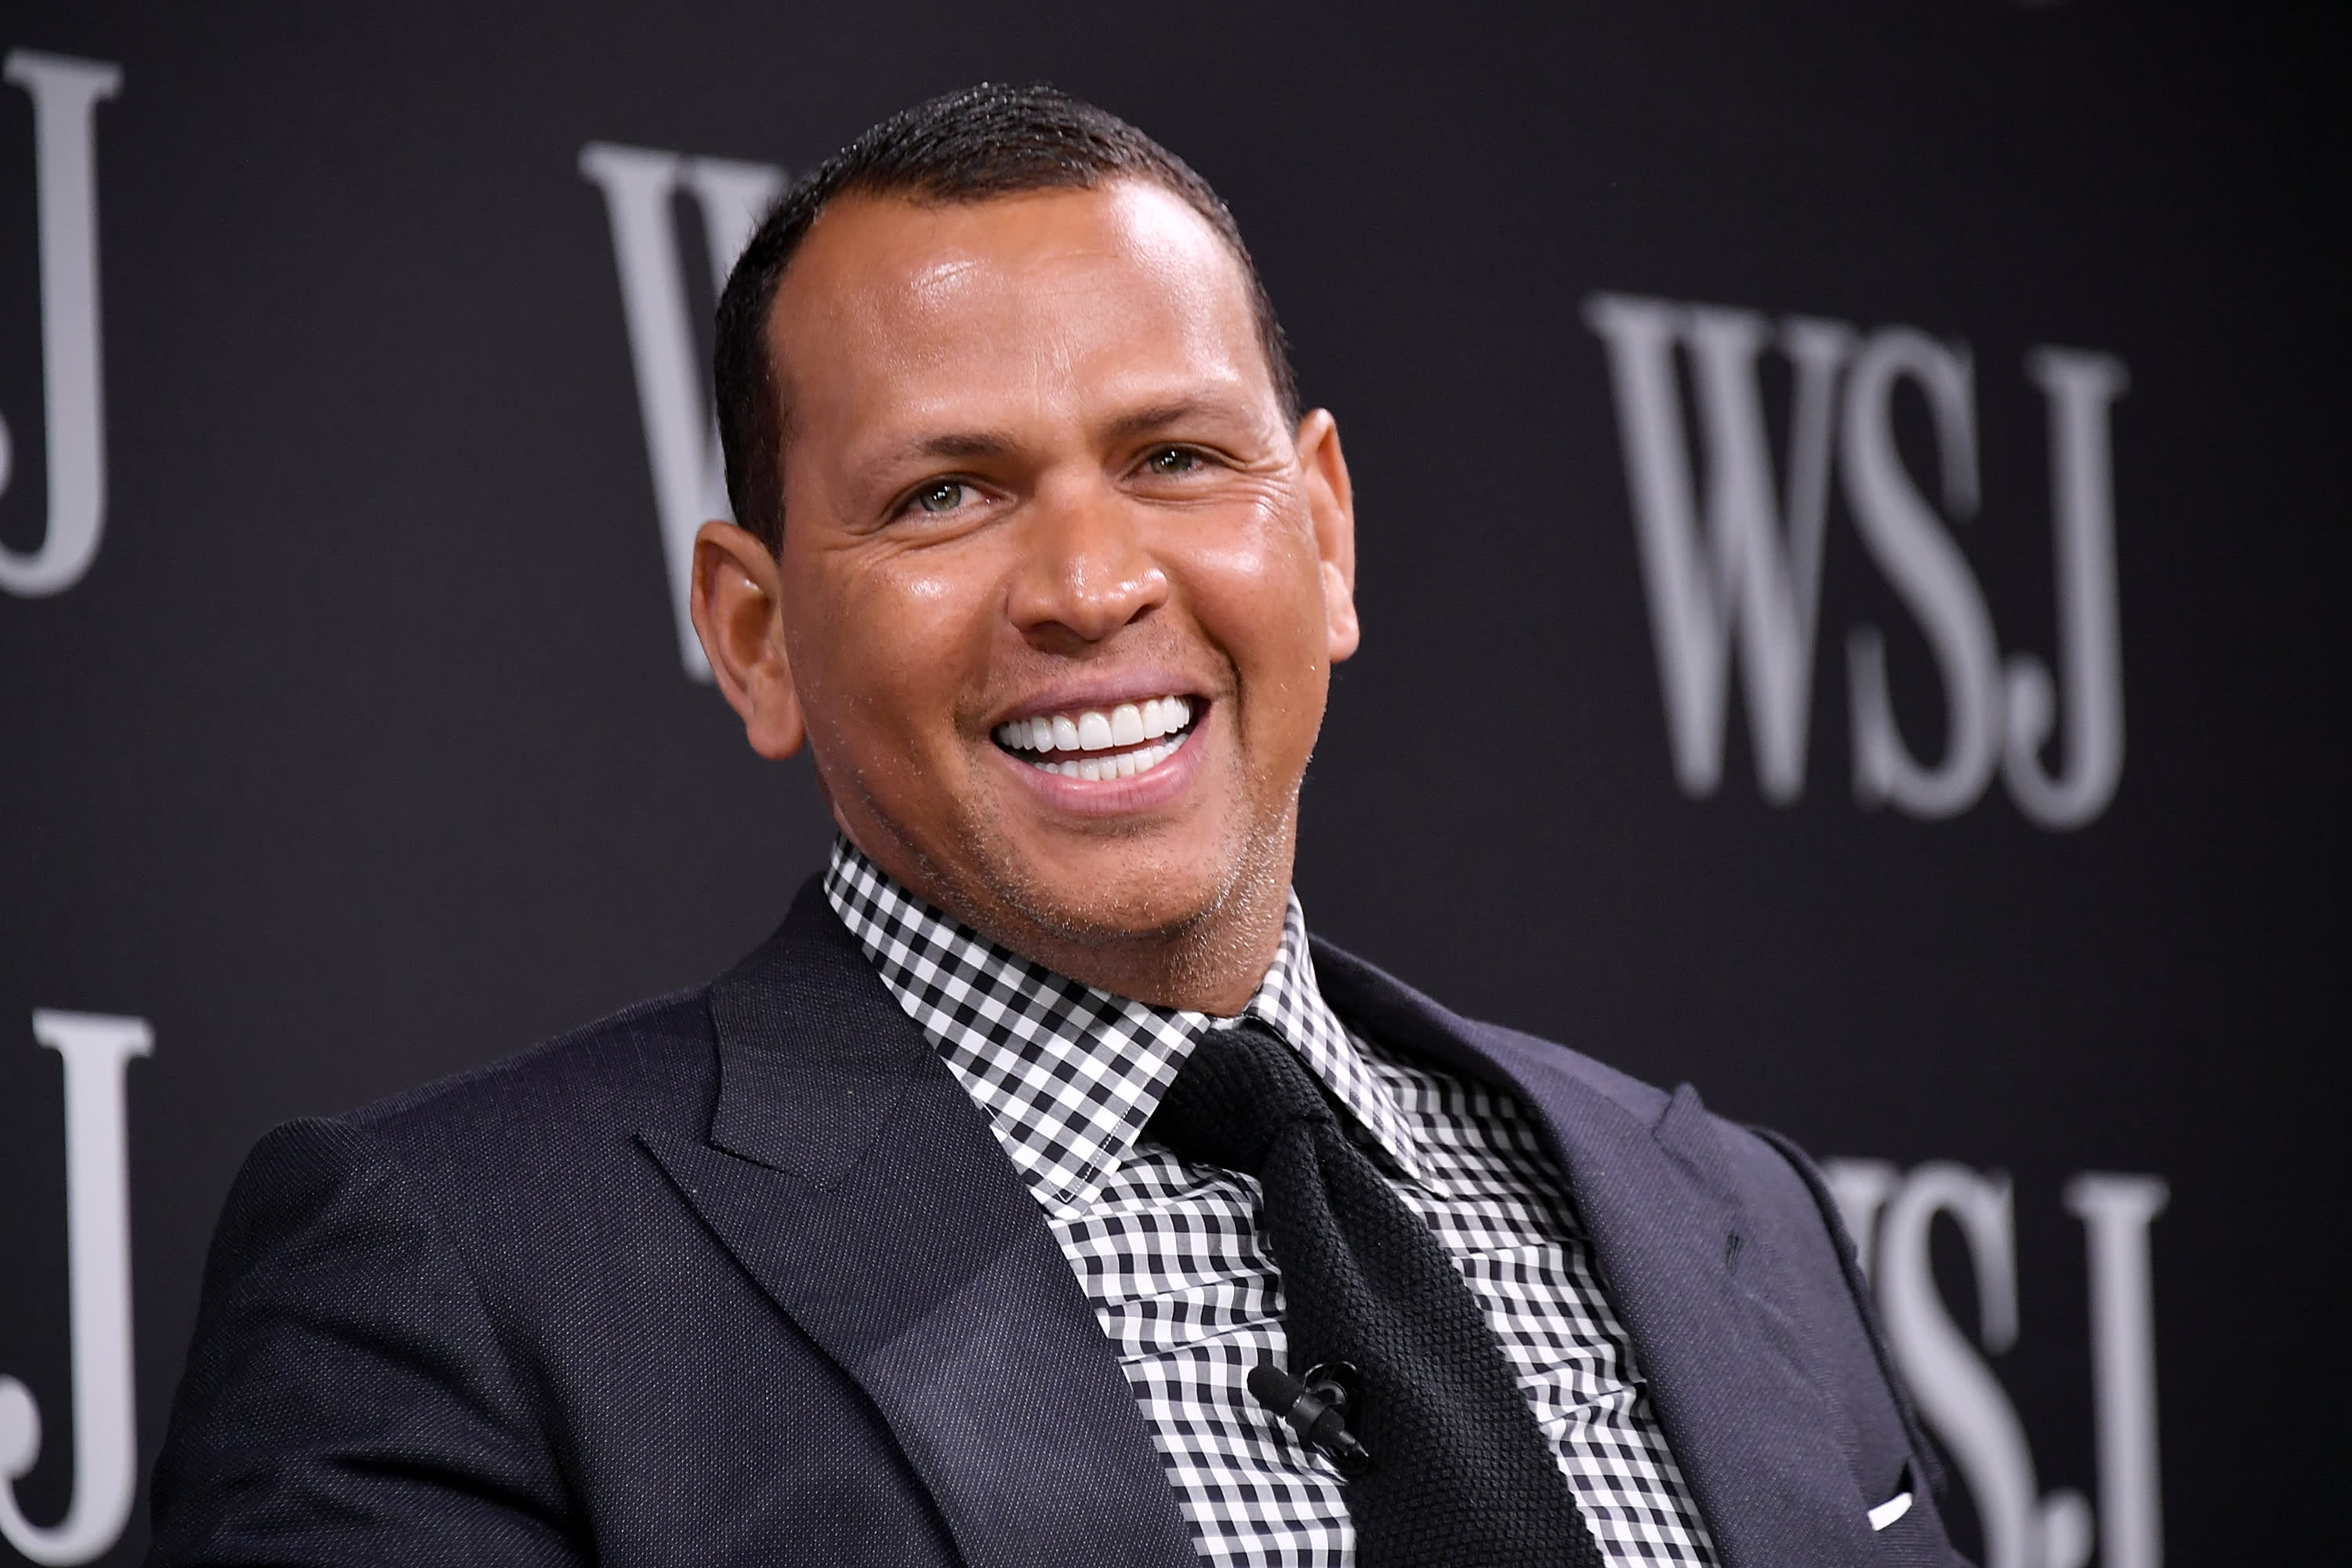 Alex Rodriguez on how to reinvent yourself